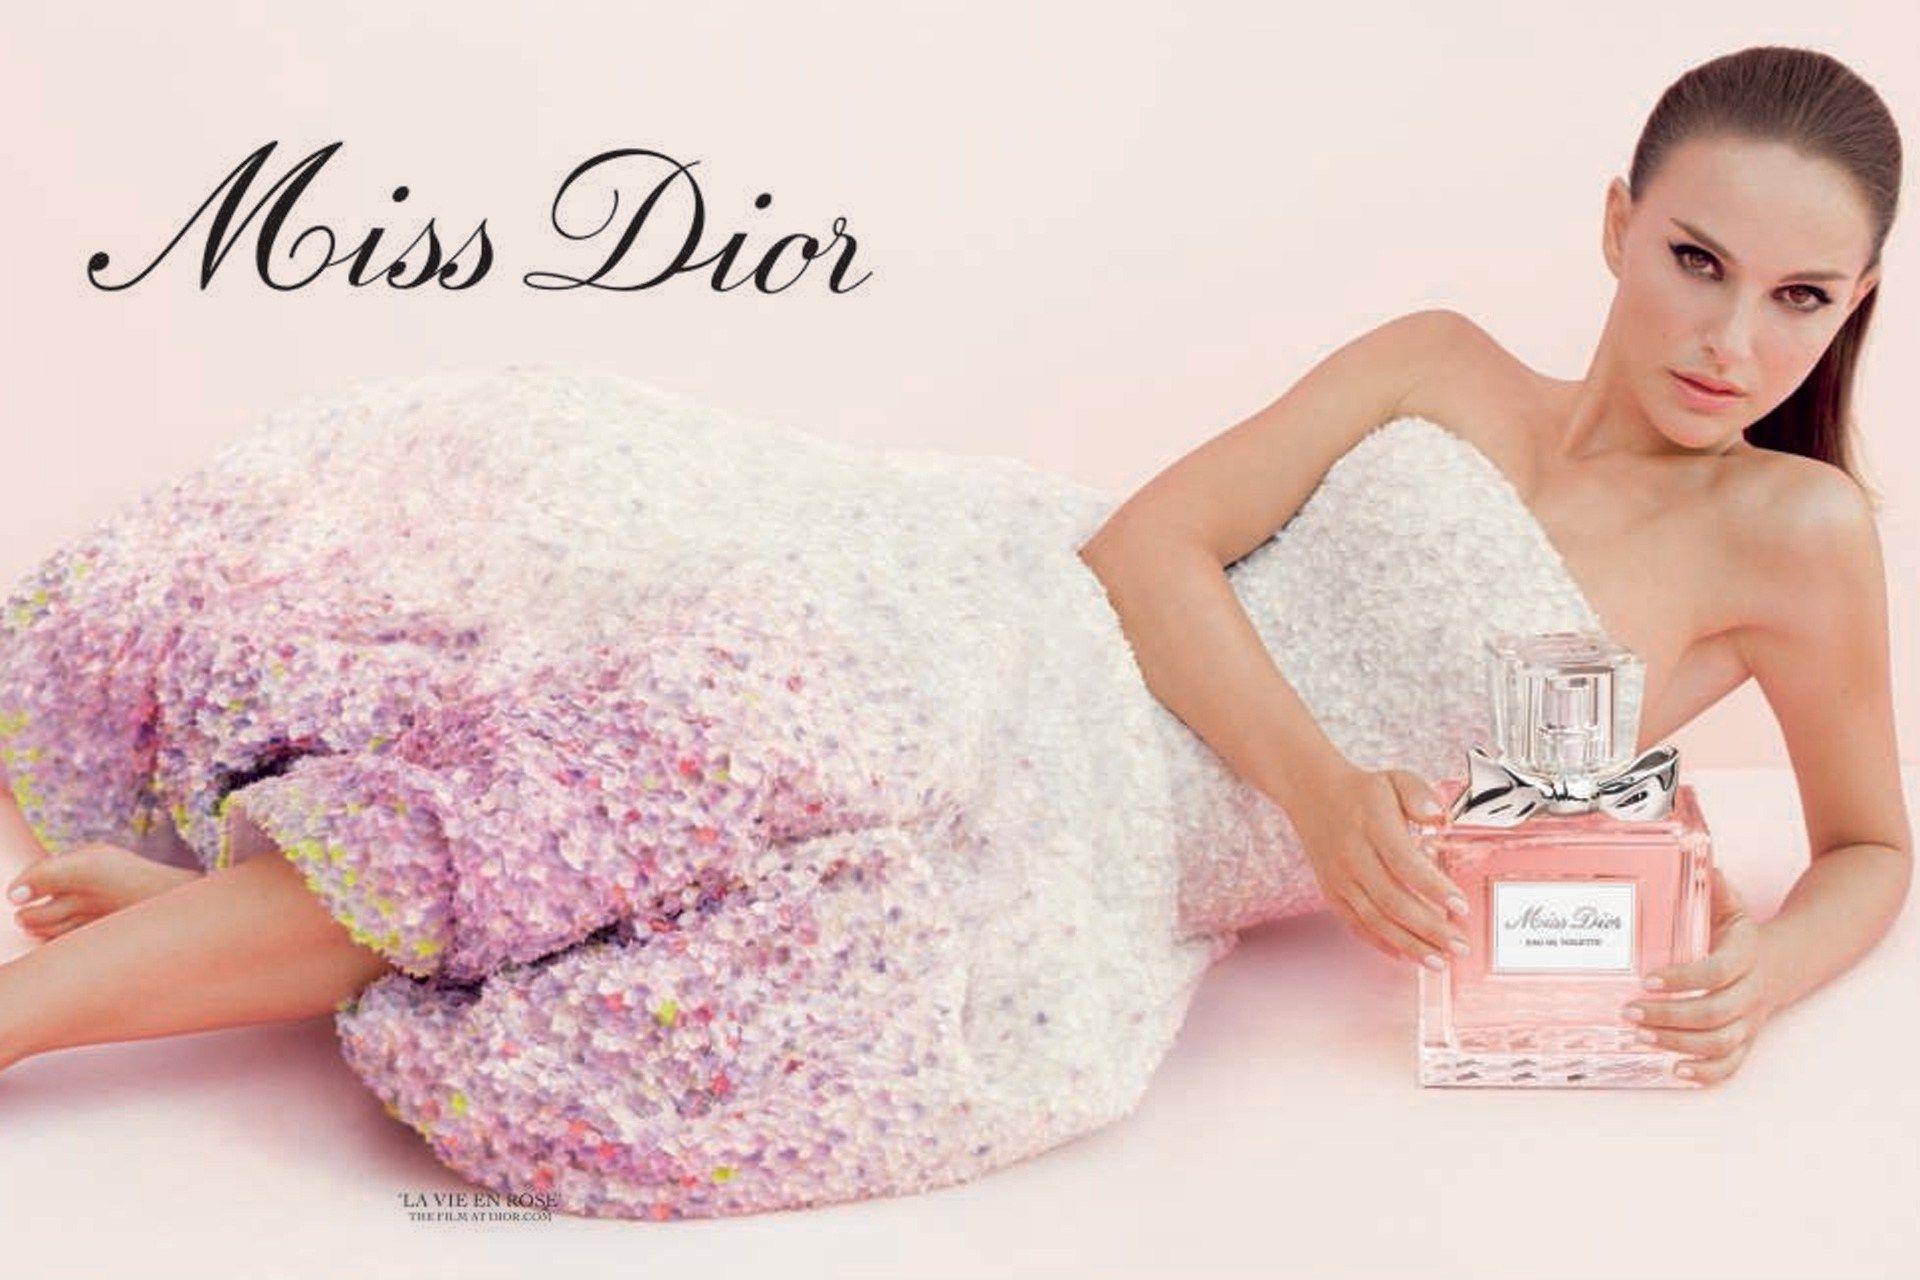 The new fragrance by Dior wallpaper and image